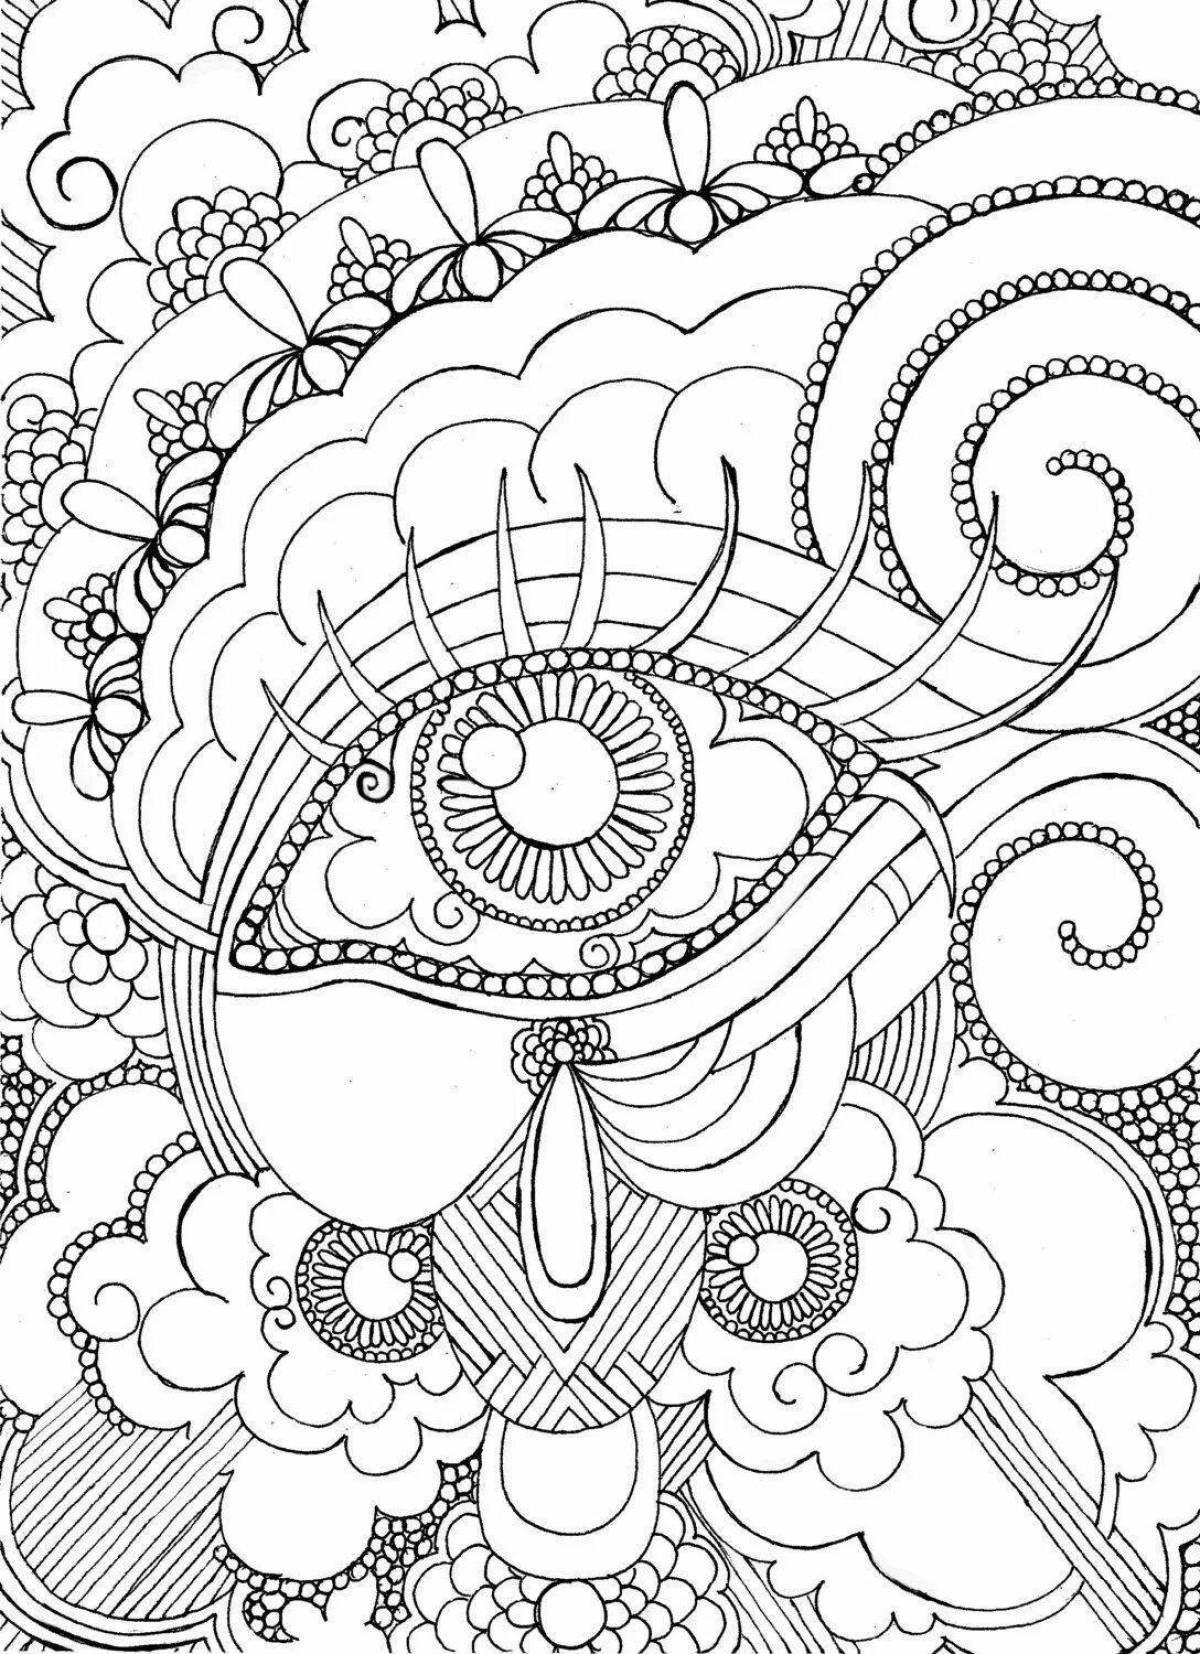 Playful sedatives coloring page